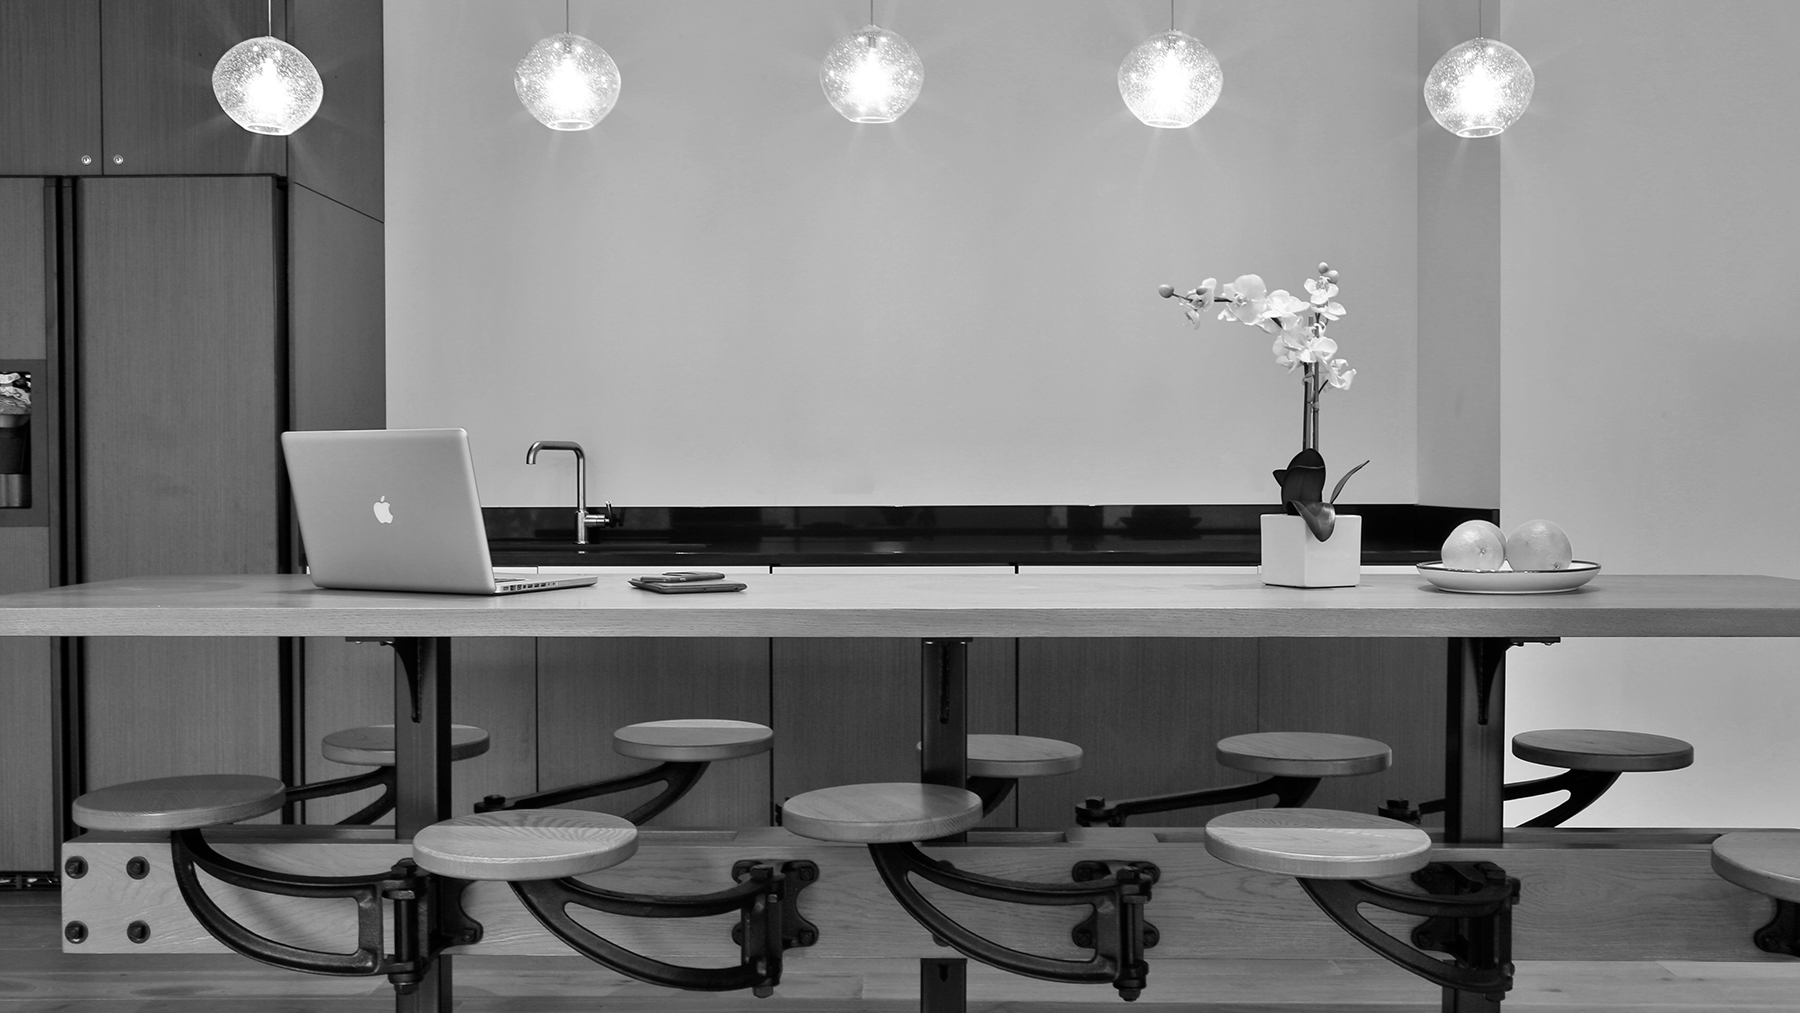 Black and white image of a kitchen with a Macbook and some decorations on a table